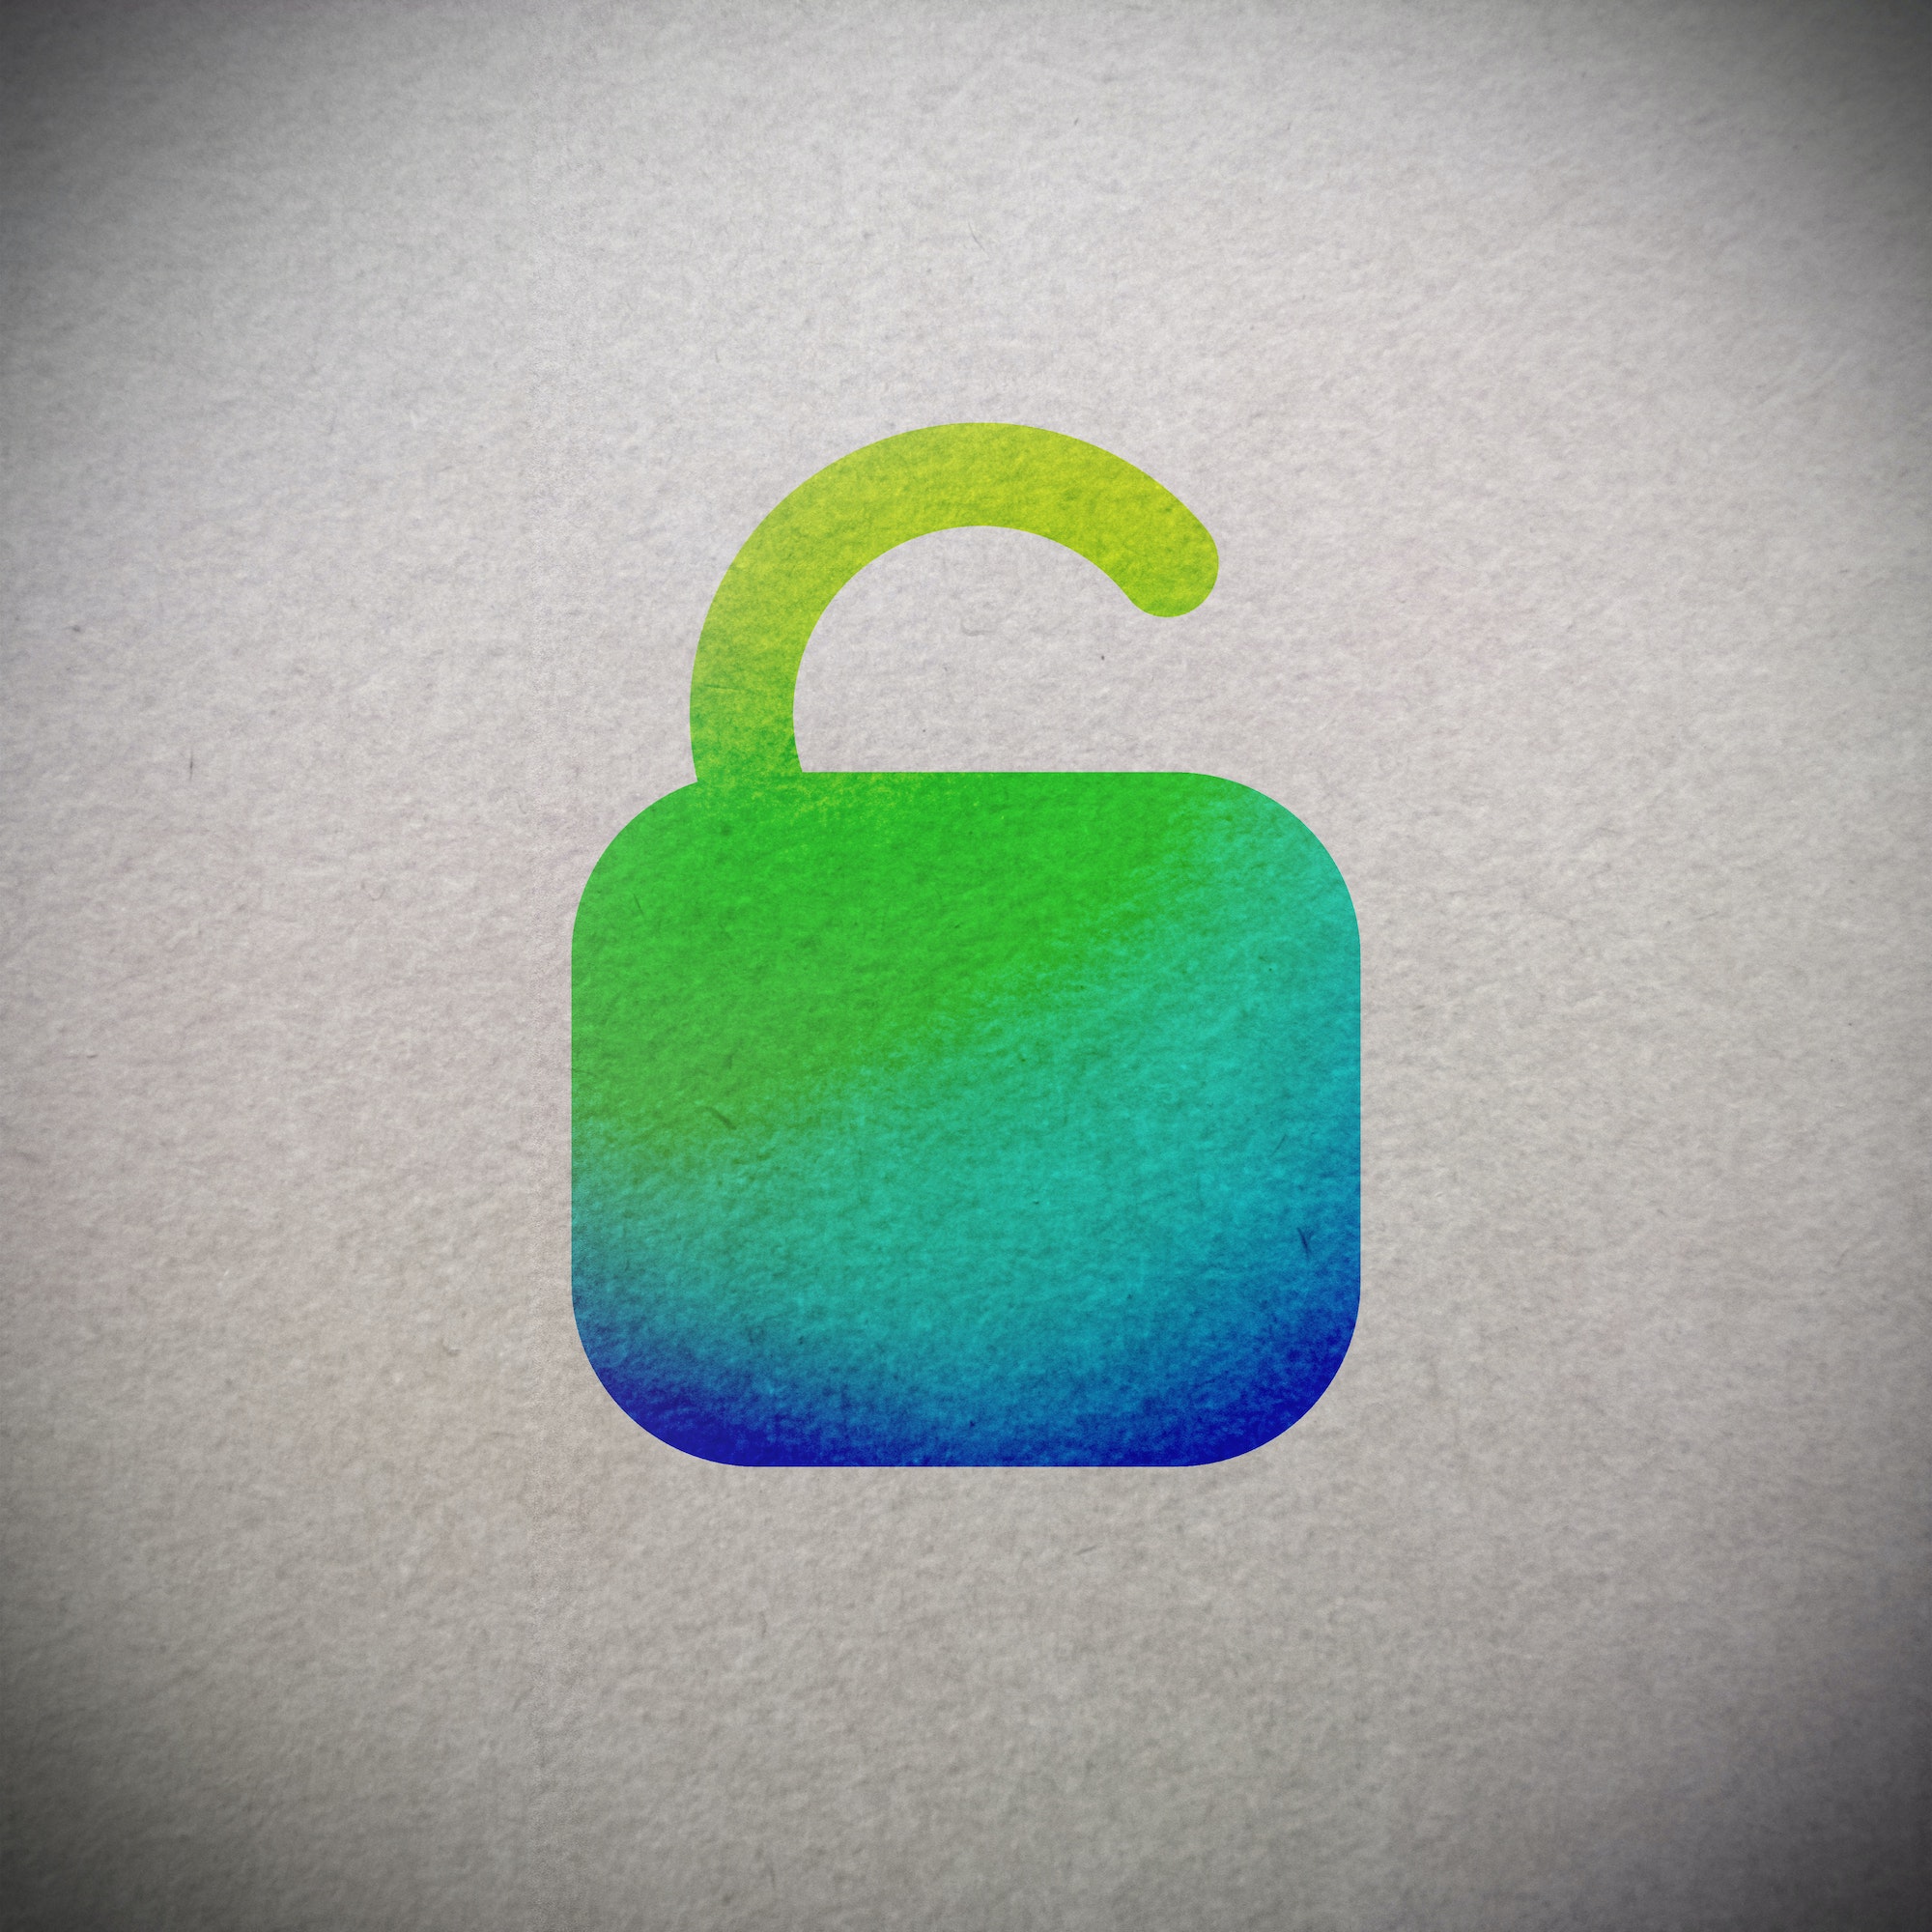 Lock icon on paper background